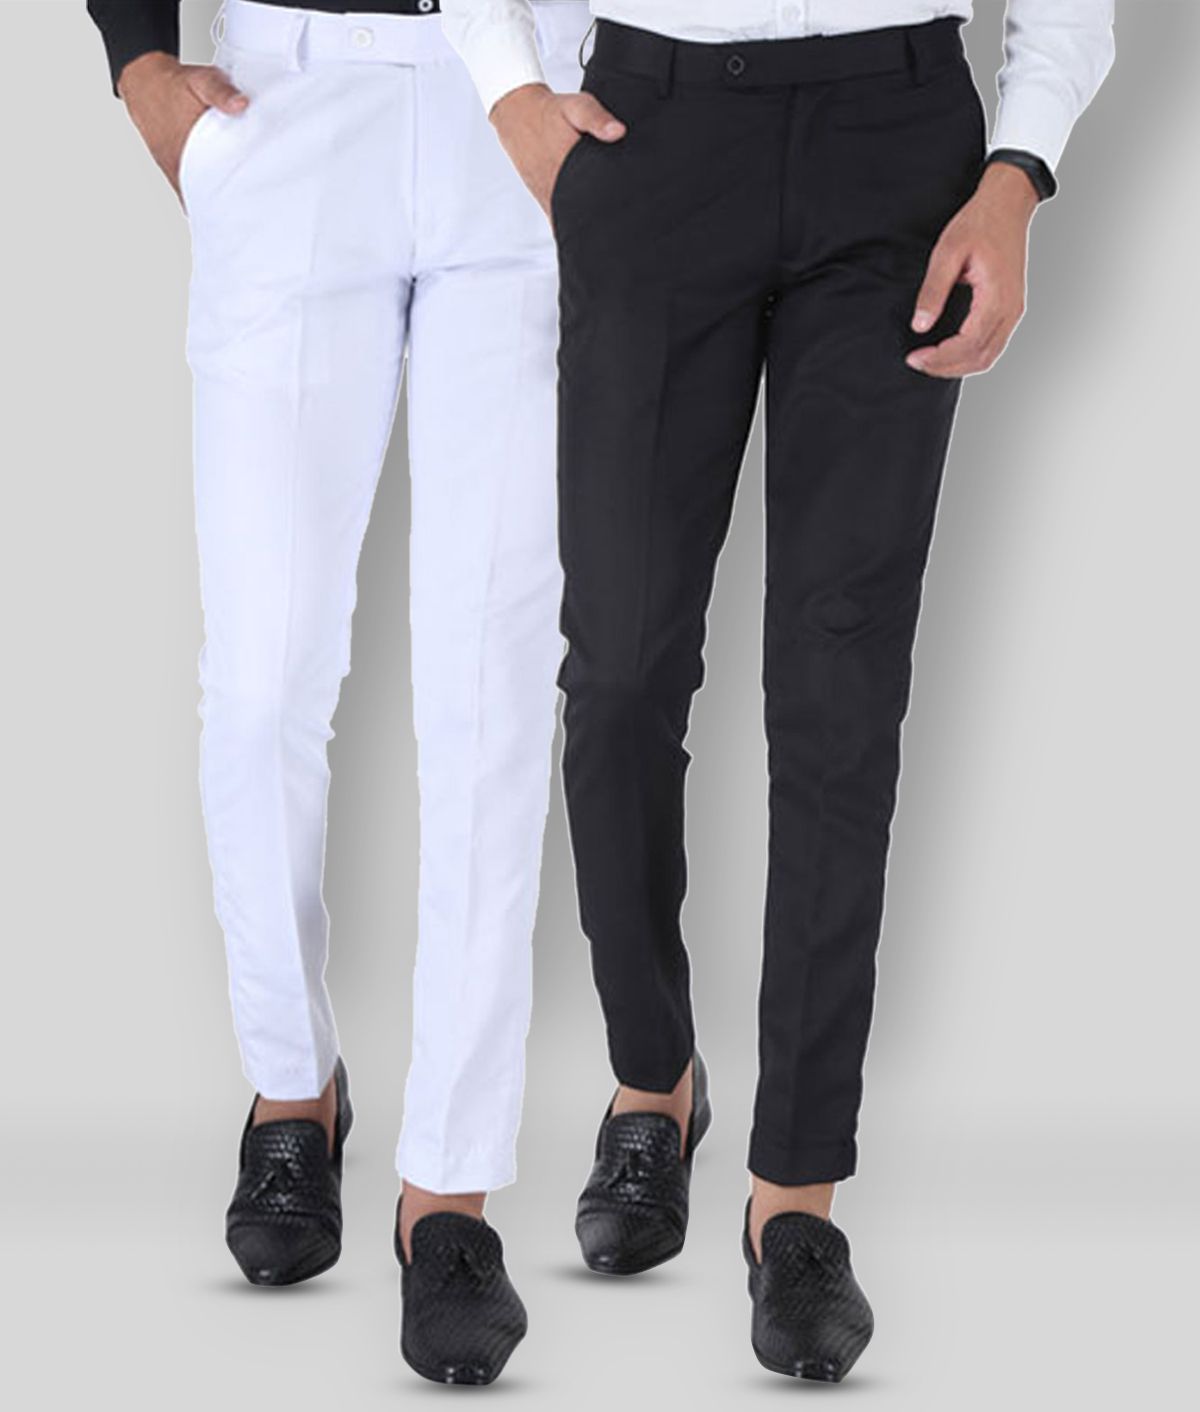     			SREY - White Polycotton Slim - Fit Men's Chinos ( Pack of 2 )